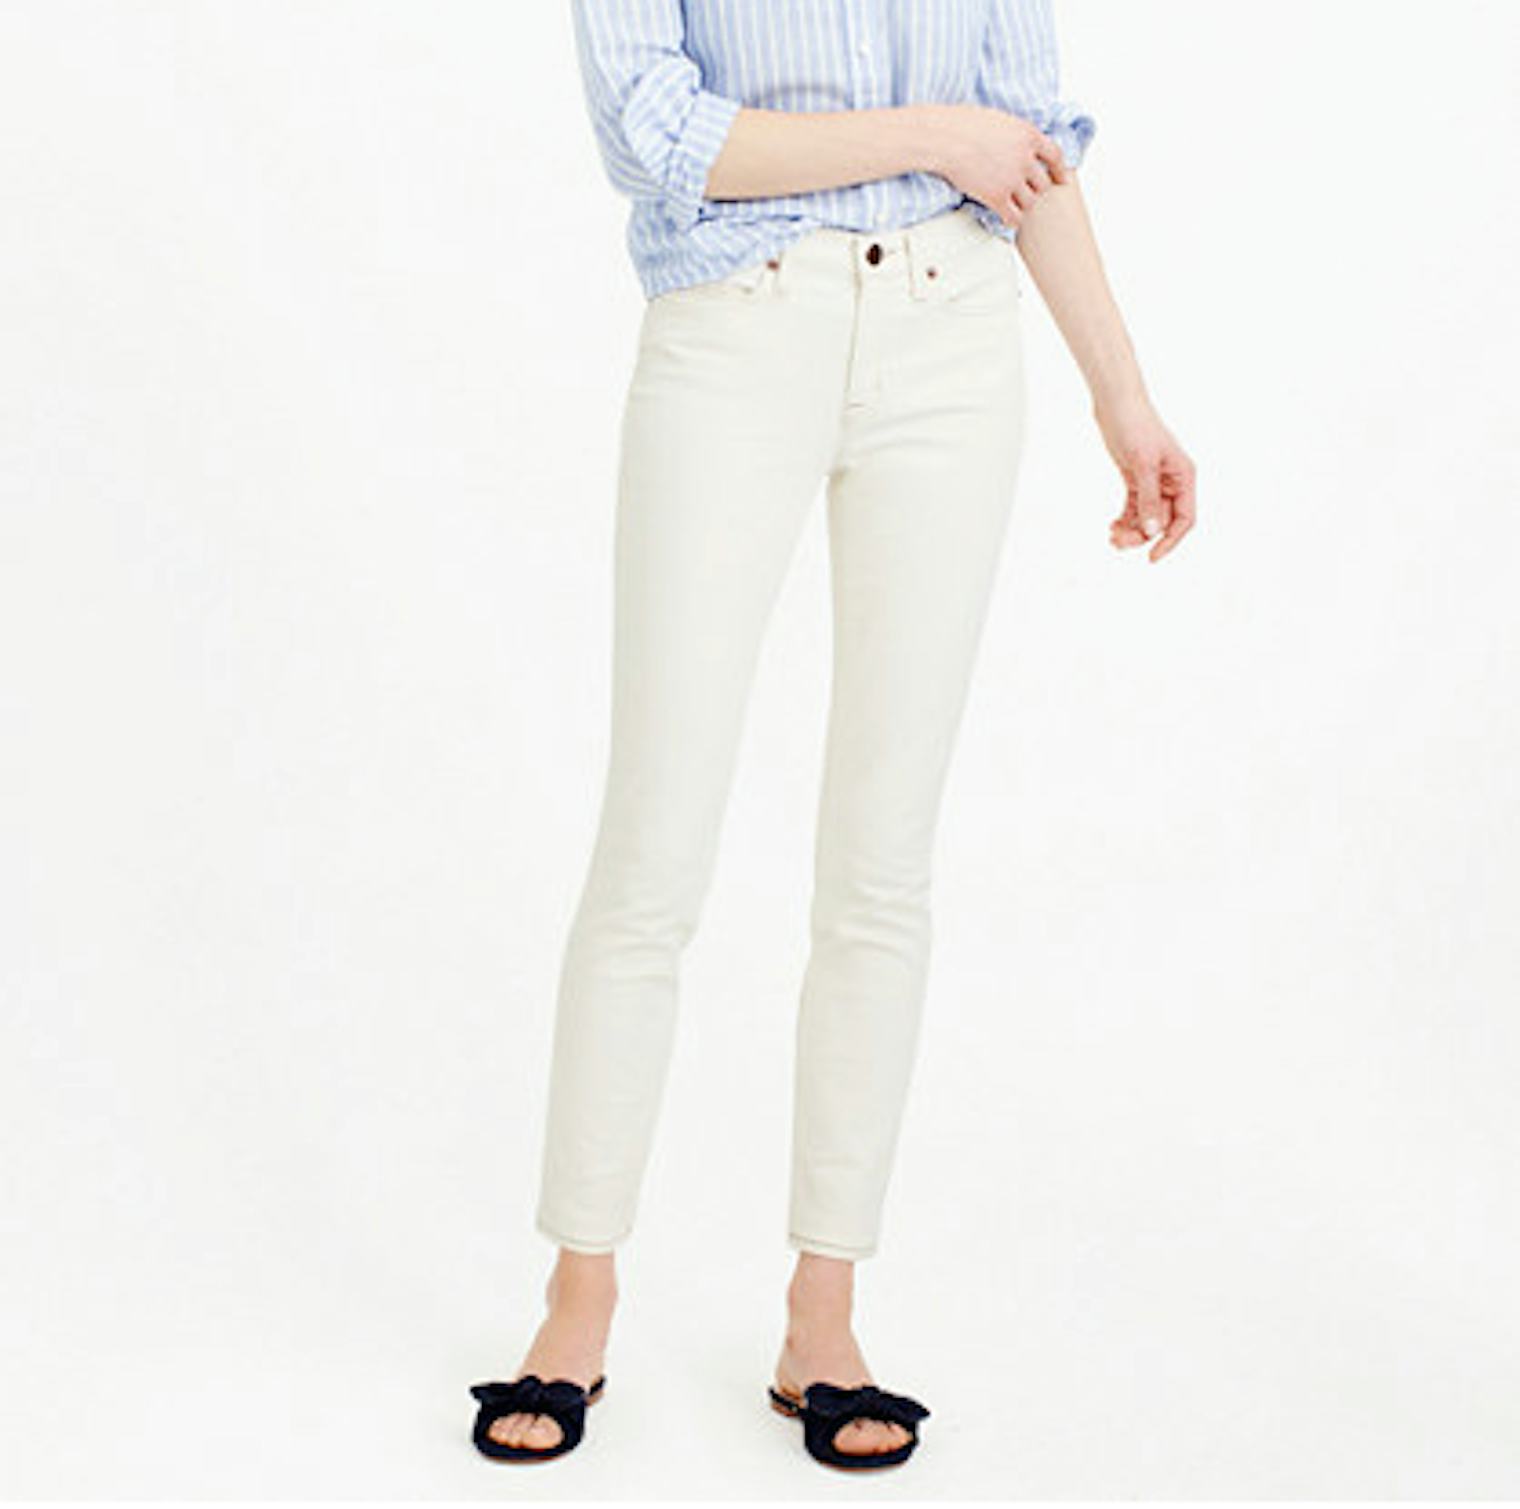 How To Pick Out The Perfect Pair Of White Jeans To Wear All Summer Long